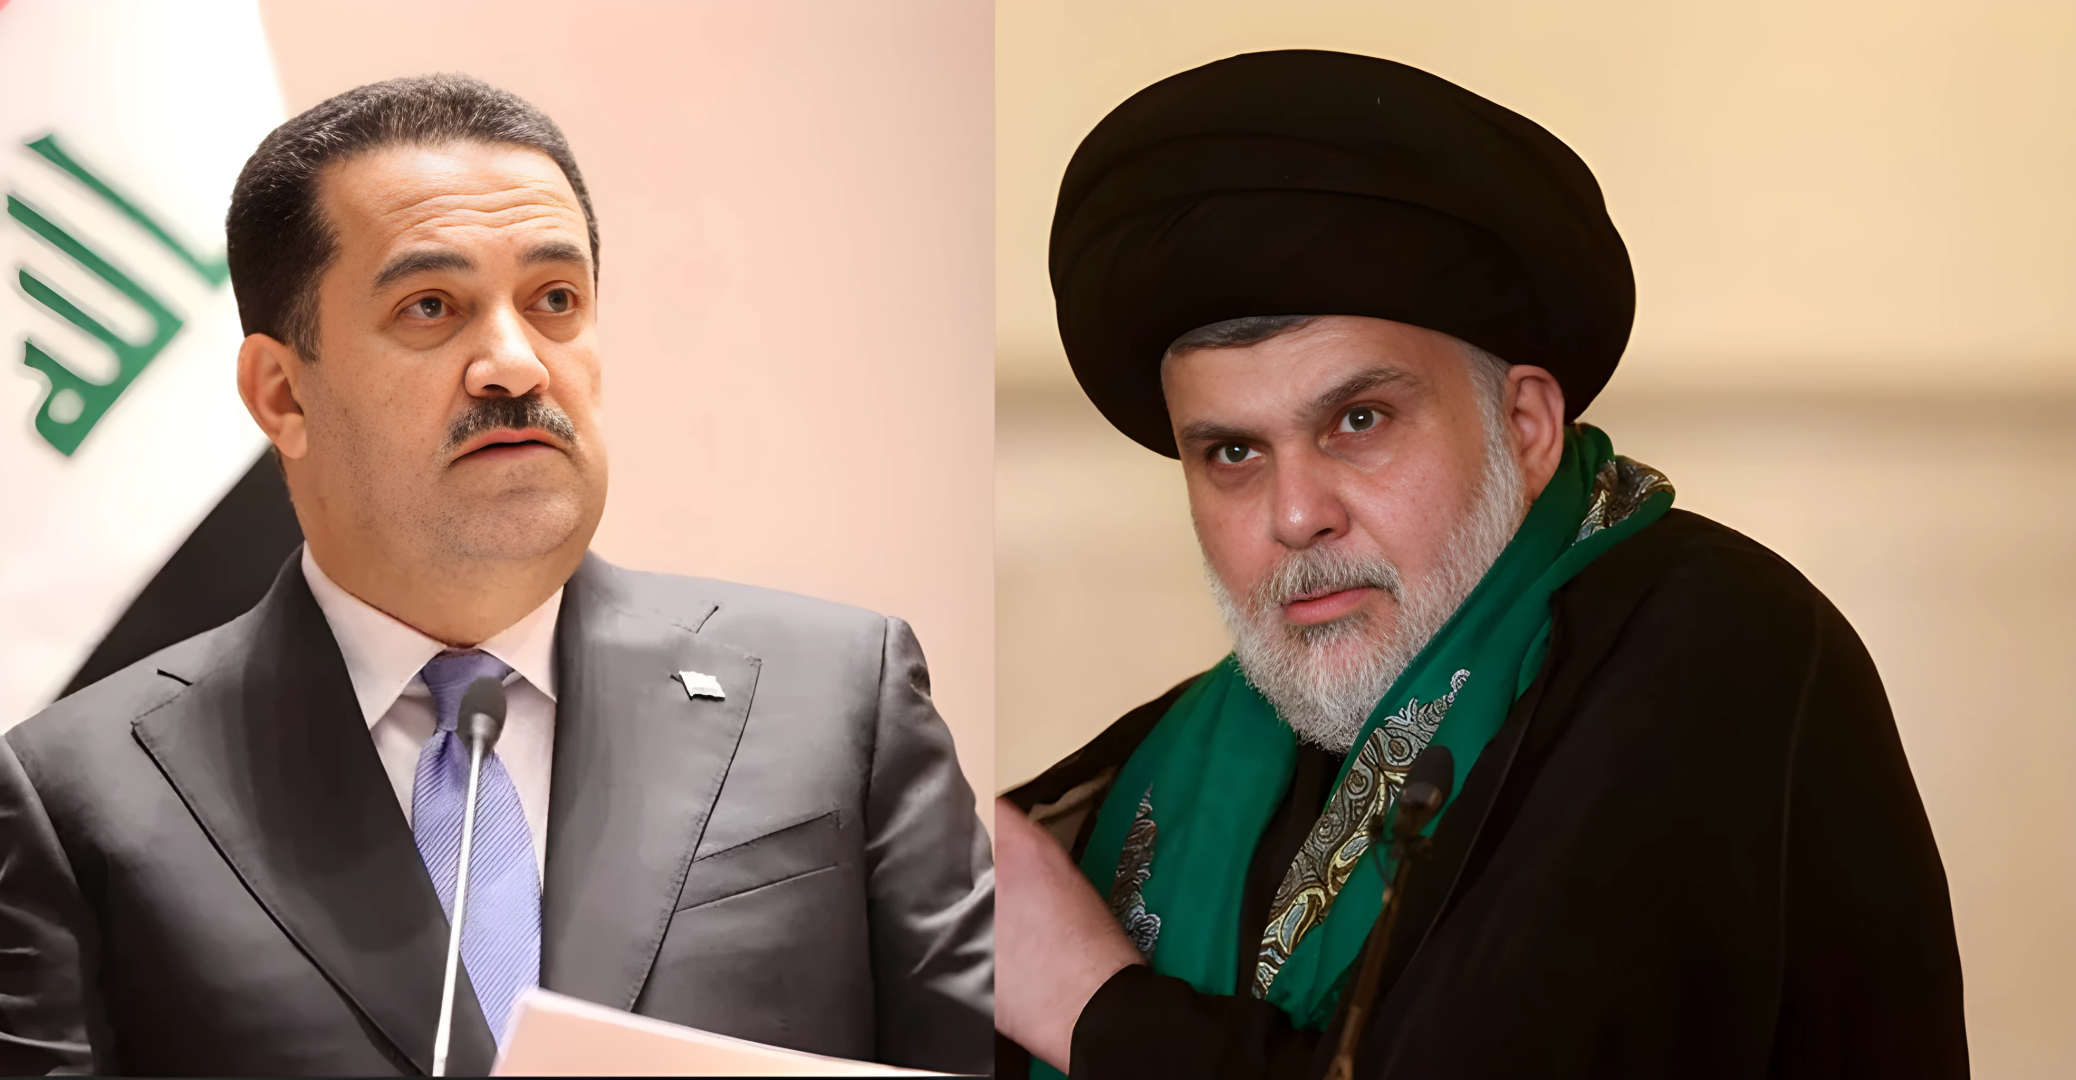 Potential alliance brewing between Al-Furatayn and Sadrist ahead of Iraq's elections